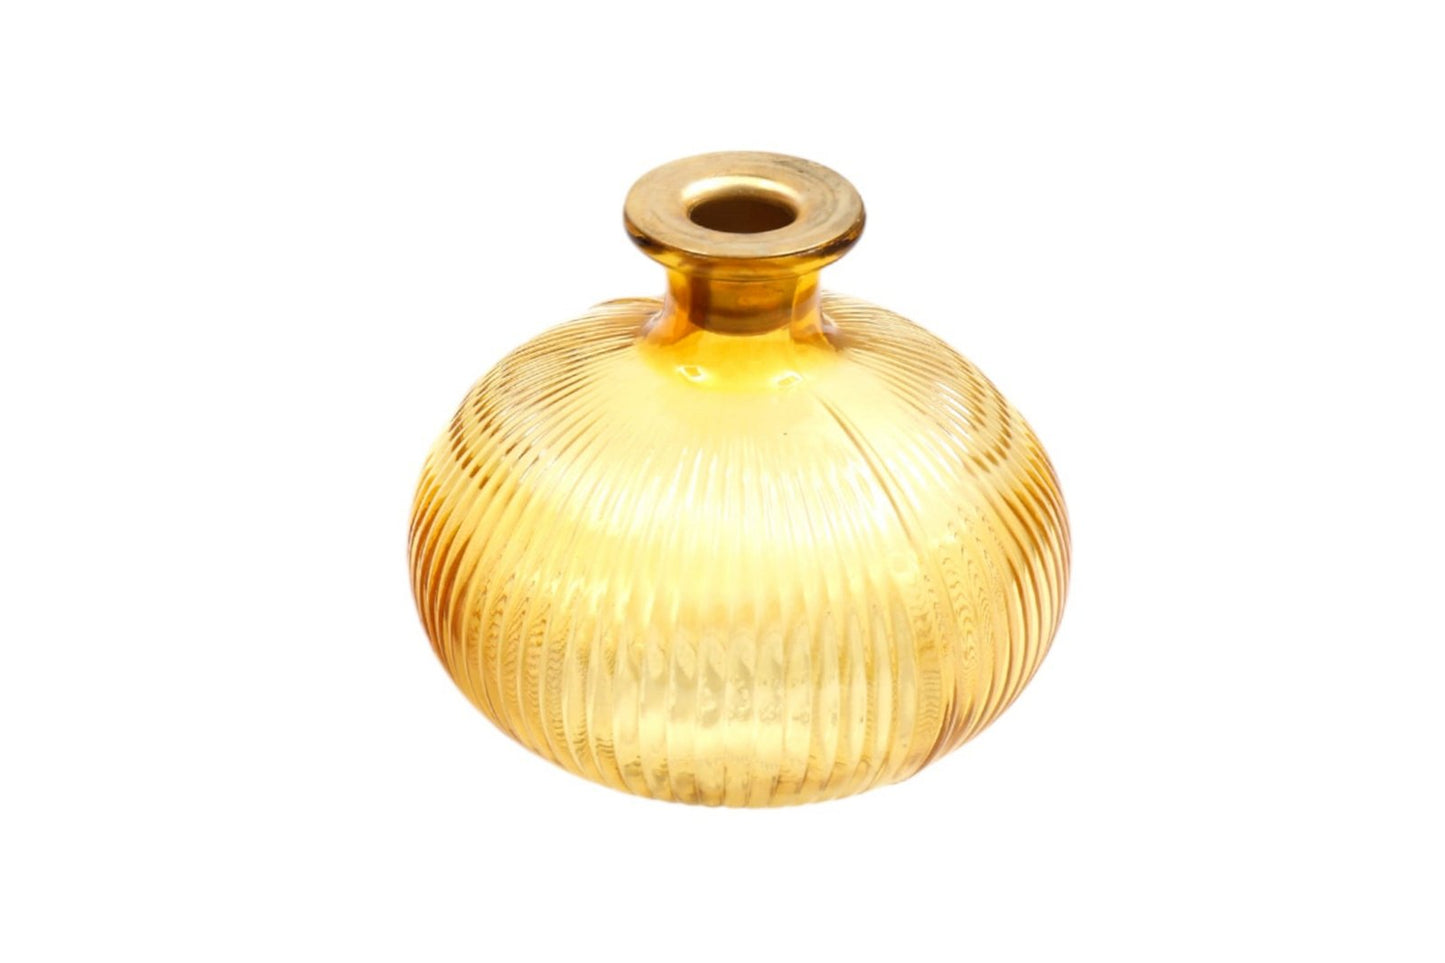 Yellow Ribbed Glass Candle Holder - a Cheeky Plant